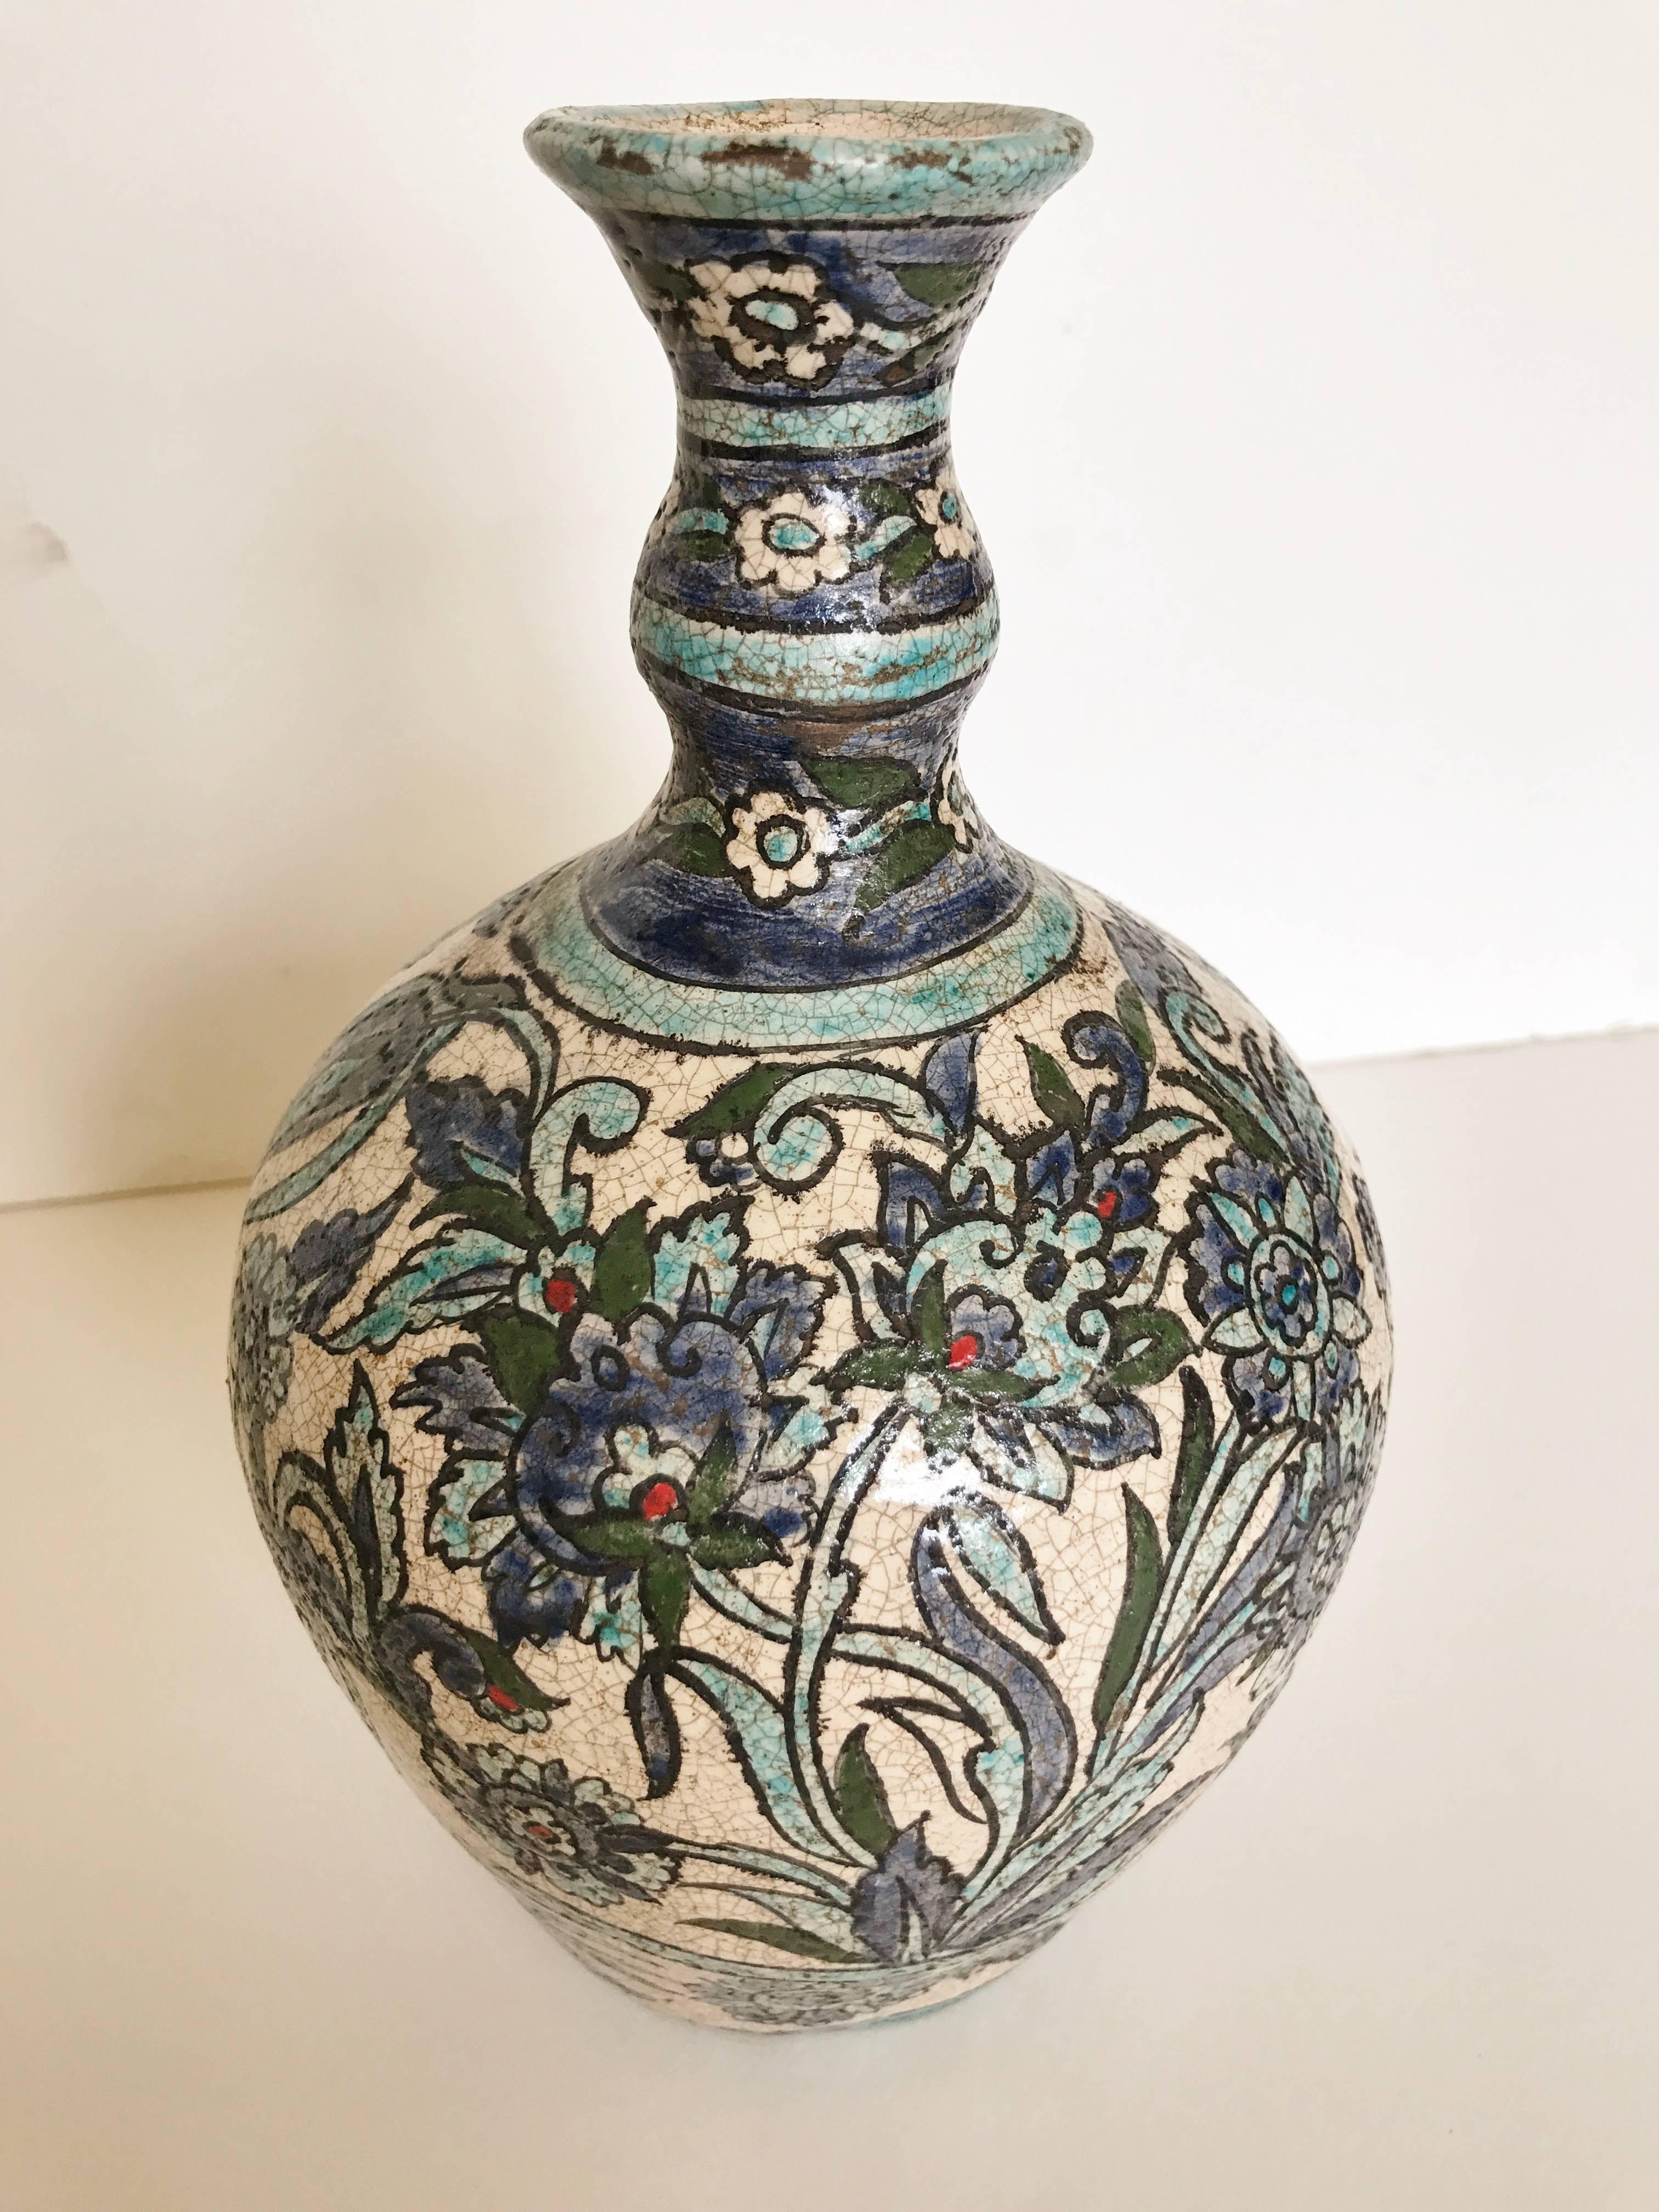 Two vintage hand-painted blue and white floral pottery vases from Syria. Late 20th century pottery with traditional designs. Larger vase is 5.5